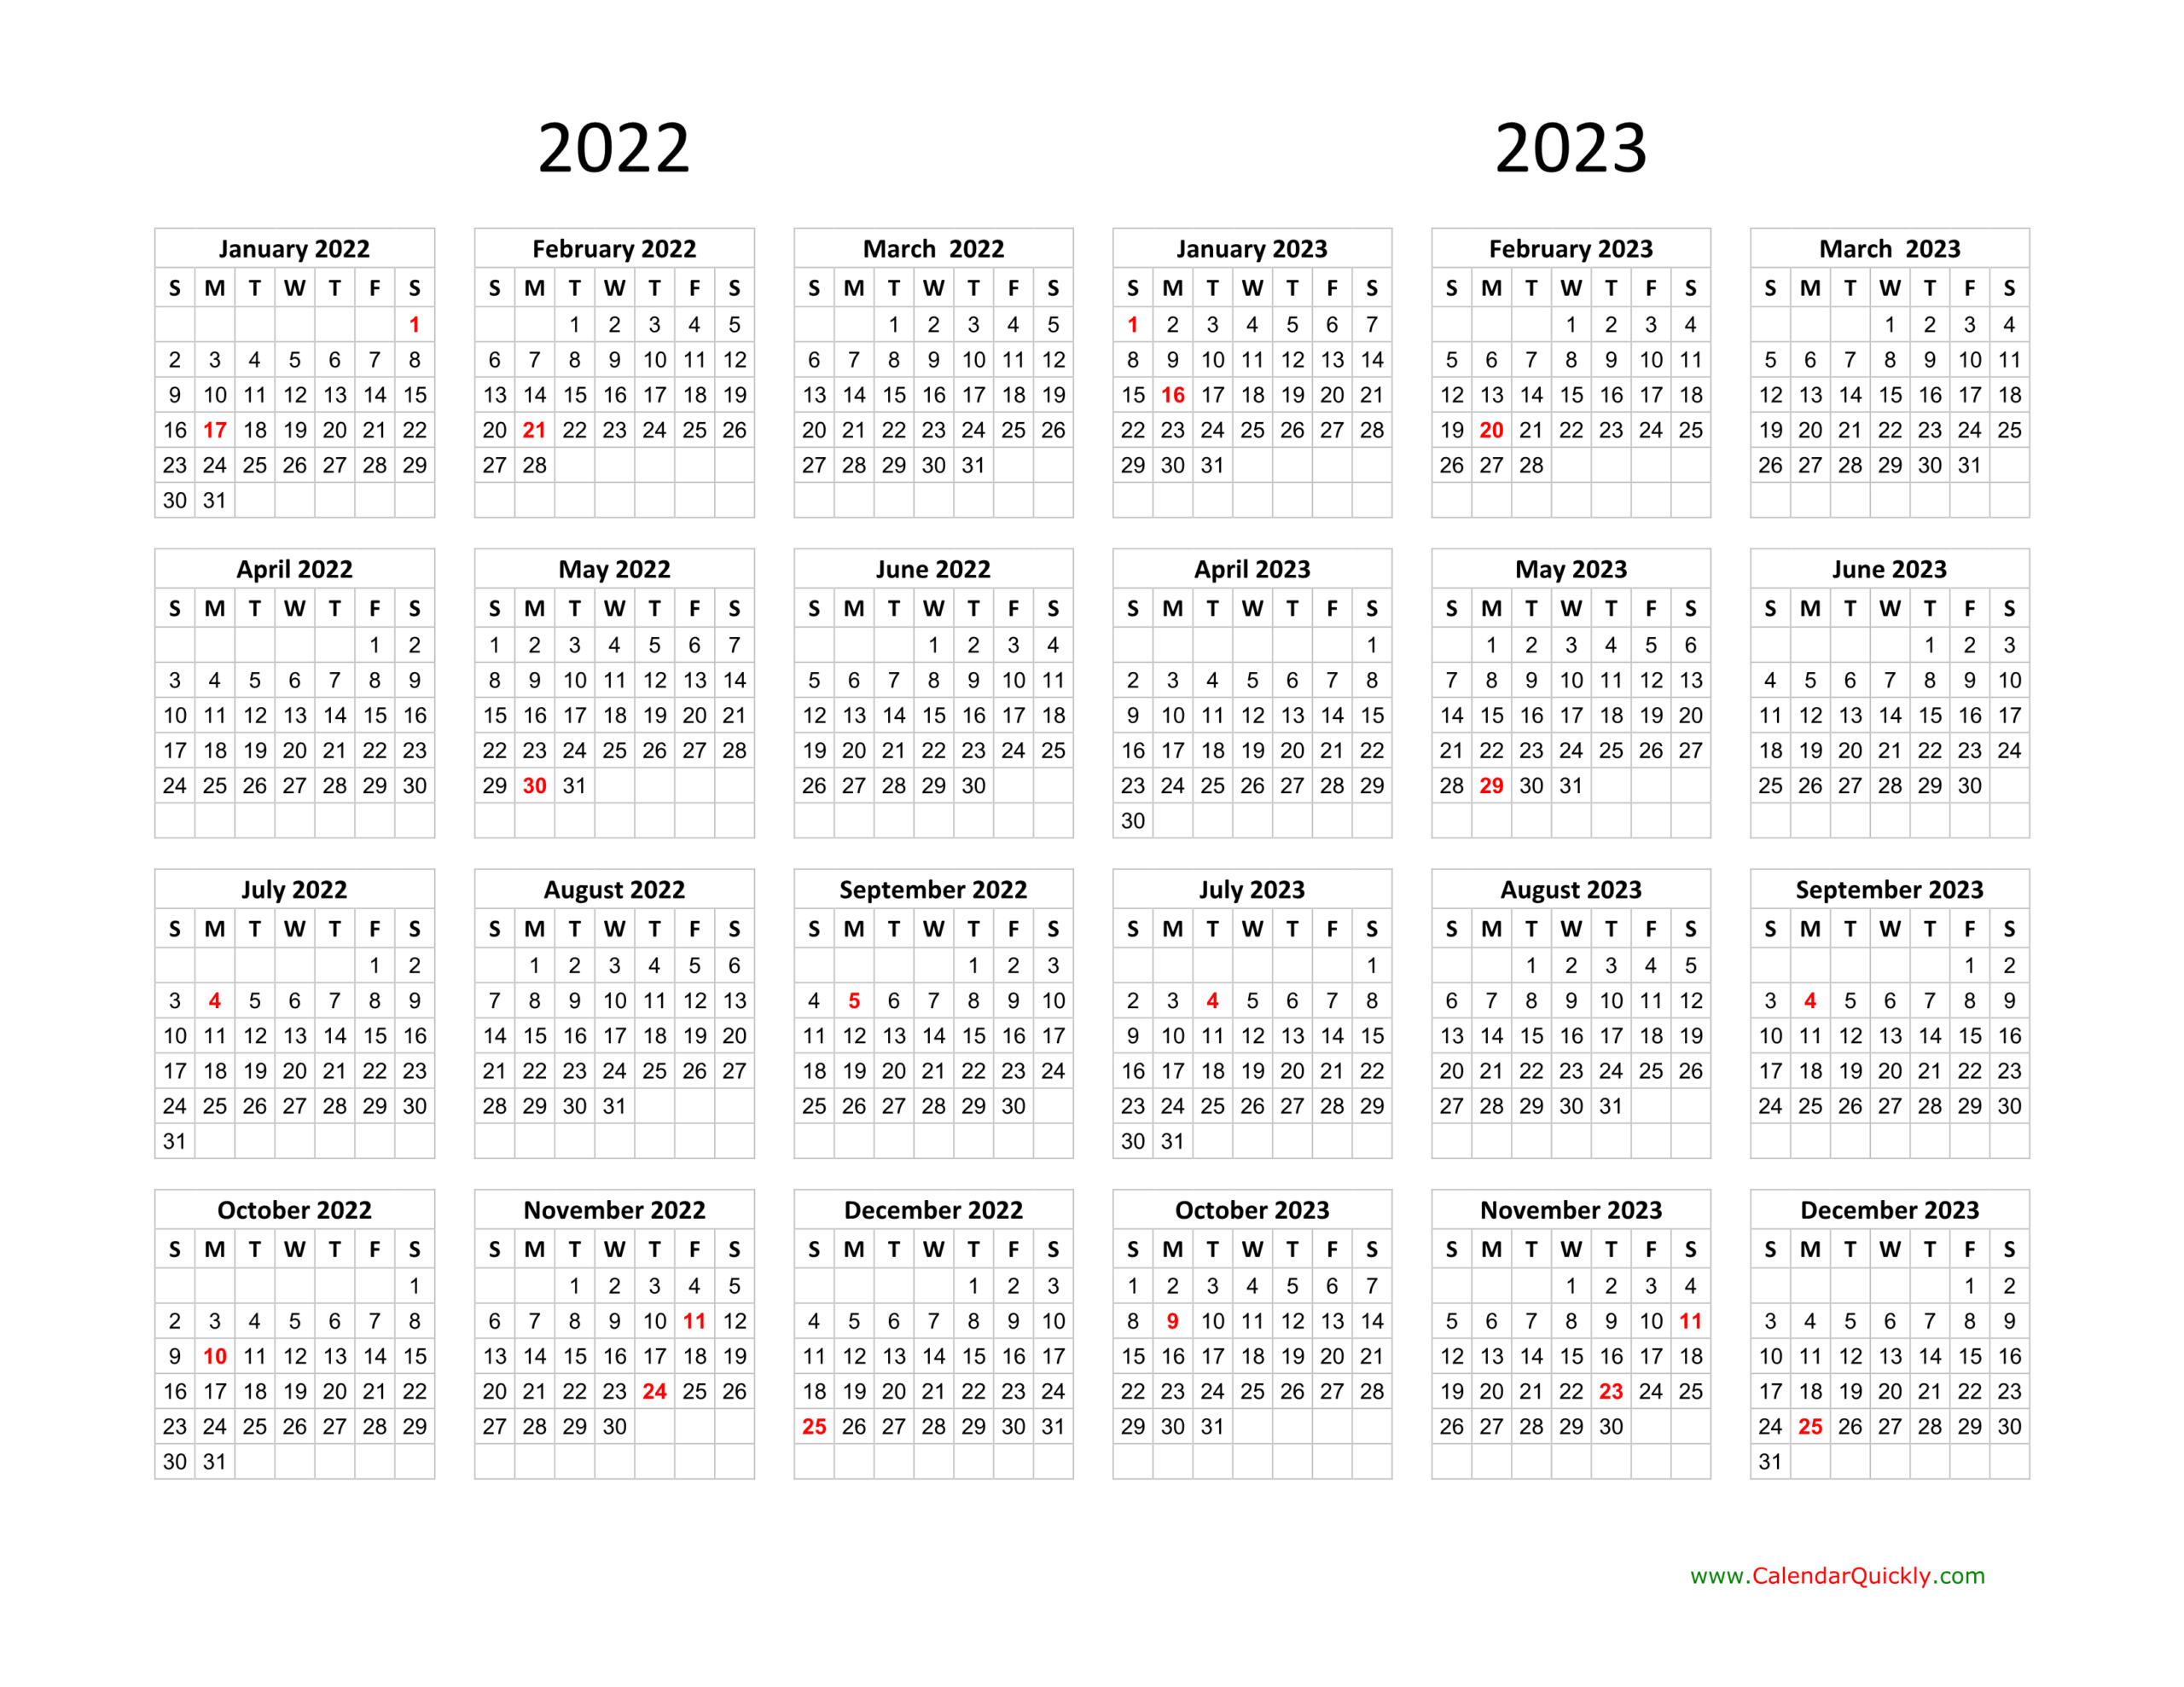 Calendar 2022 And 2023 On One Page | Calendar Quickly